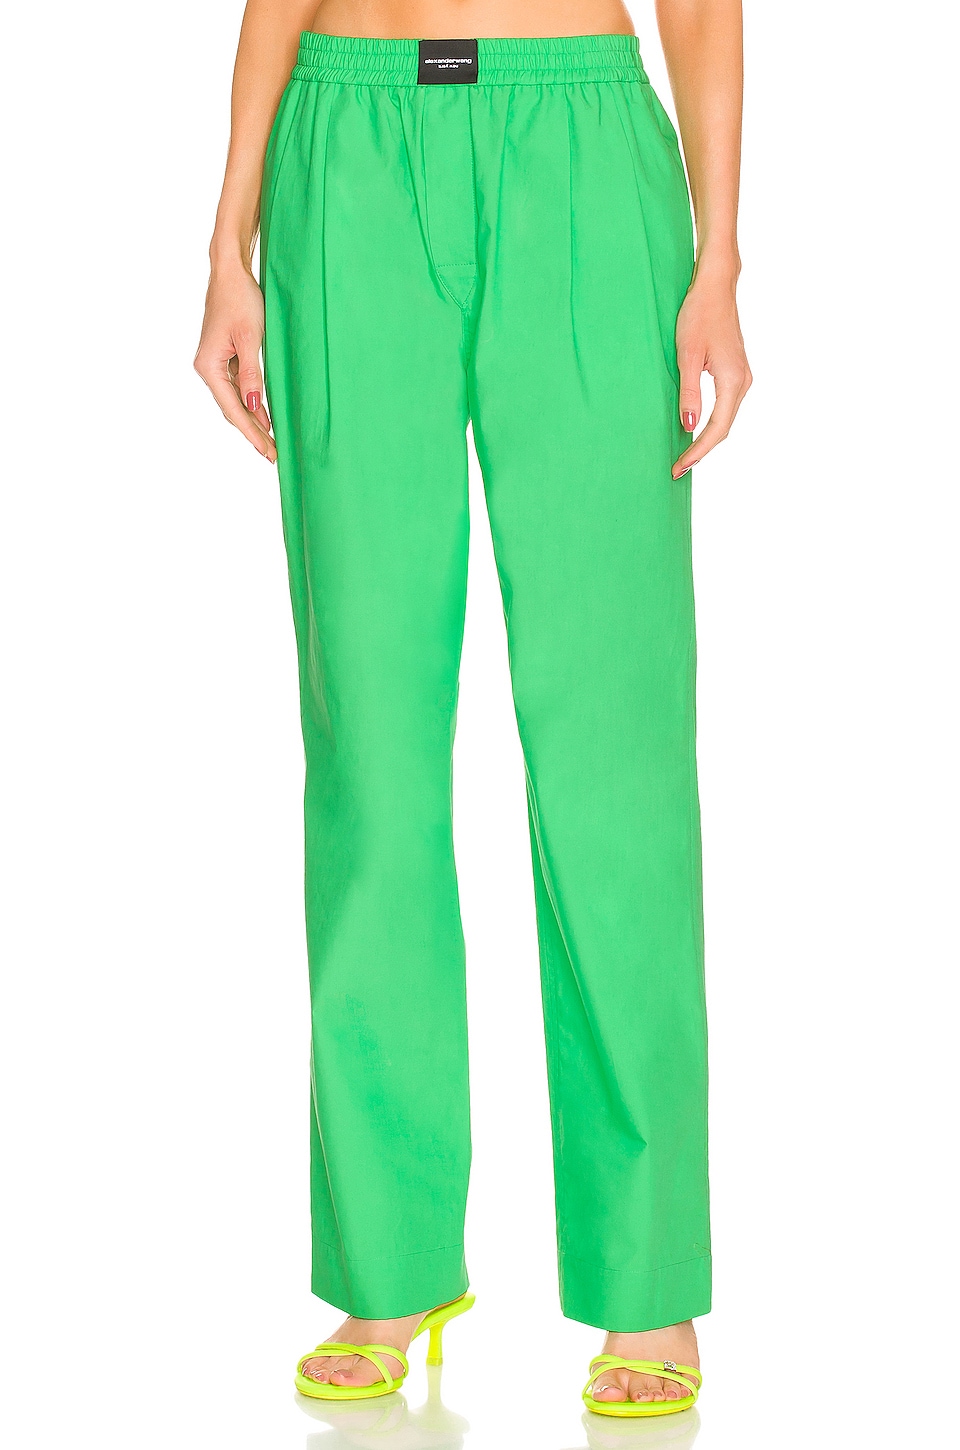 T by Alexander Wang Boxer Pant in Neon Kelly | REVOLVE